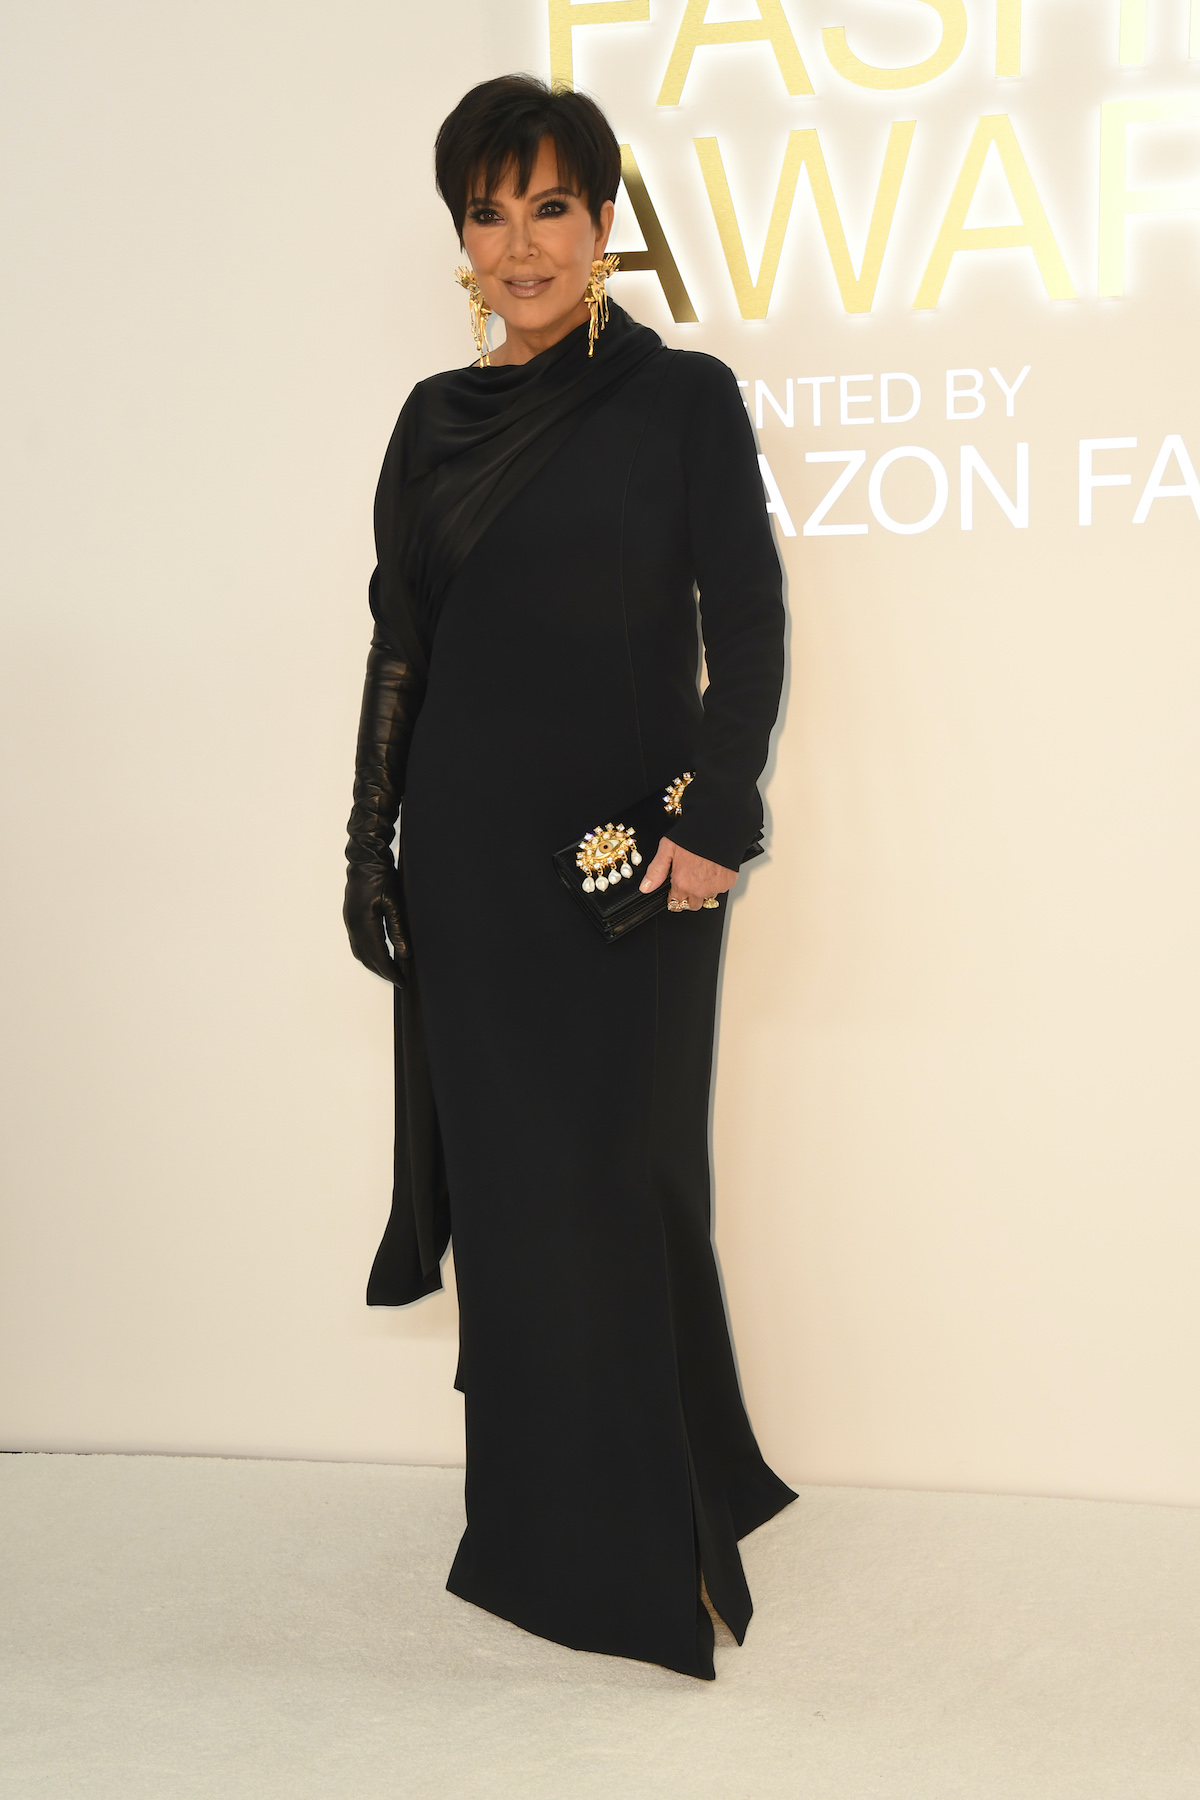 Celebrities at the CFDA awards dinner